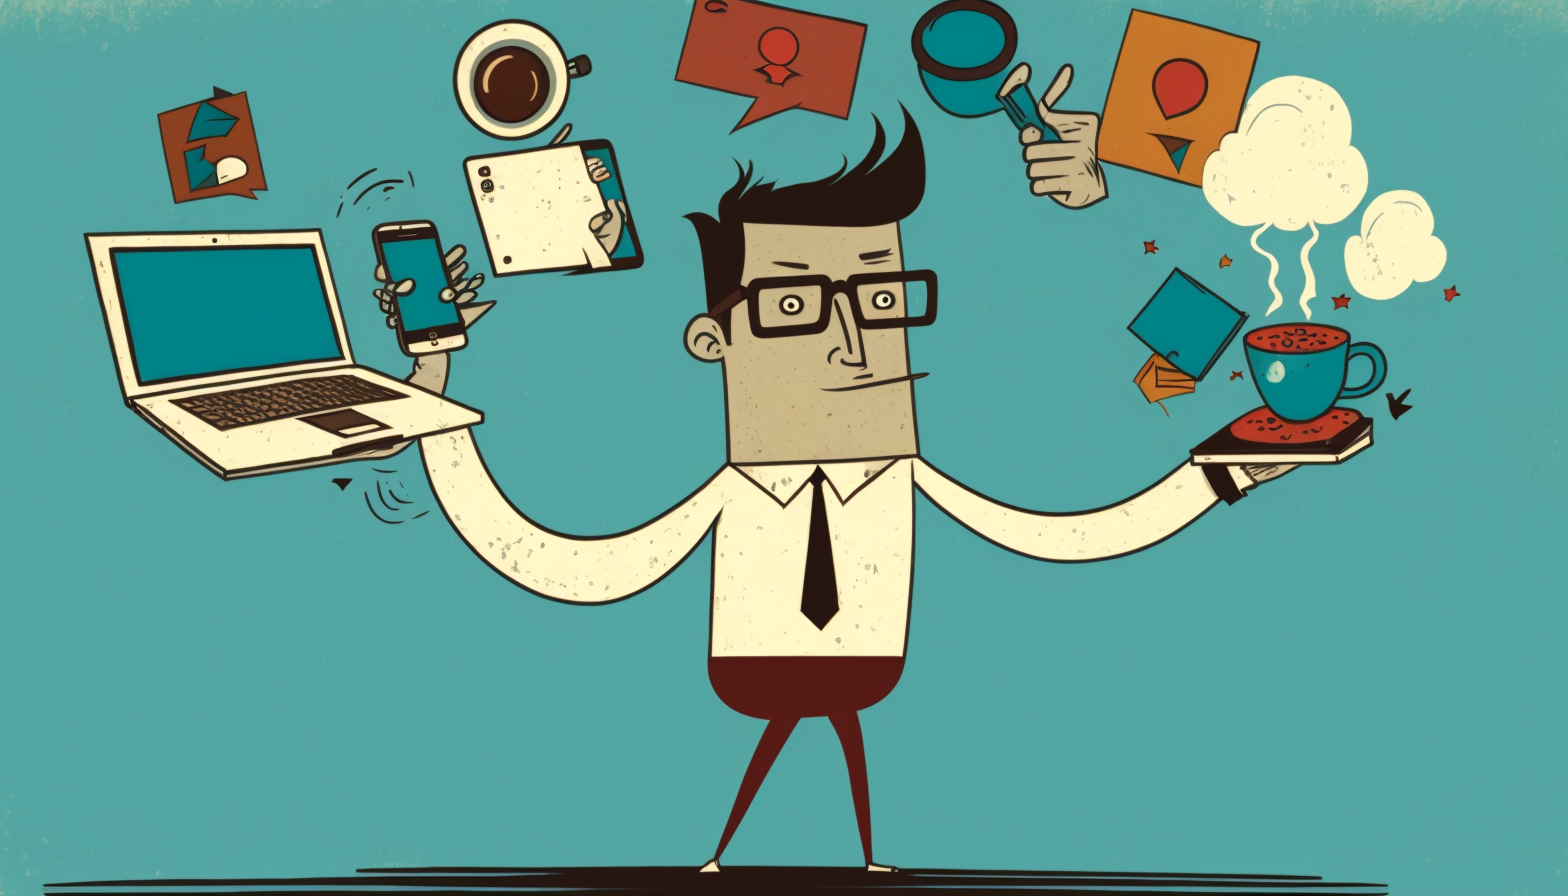 A cartoon image of a person juggling various personal devices (laptop, smartphone, tablet) and work-related items (documents, coffee cup)